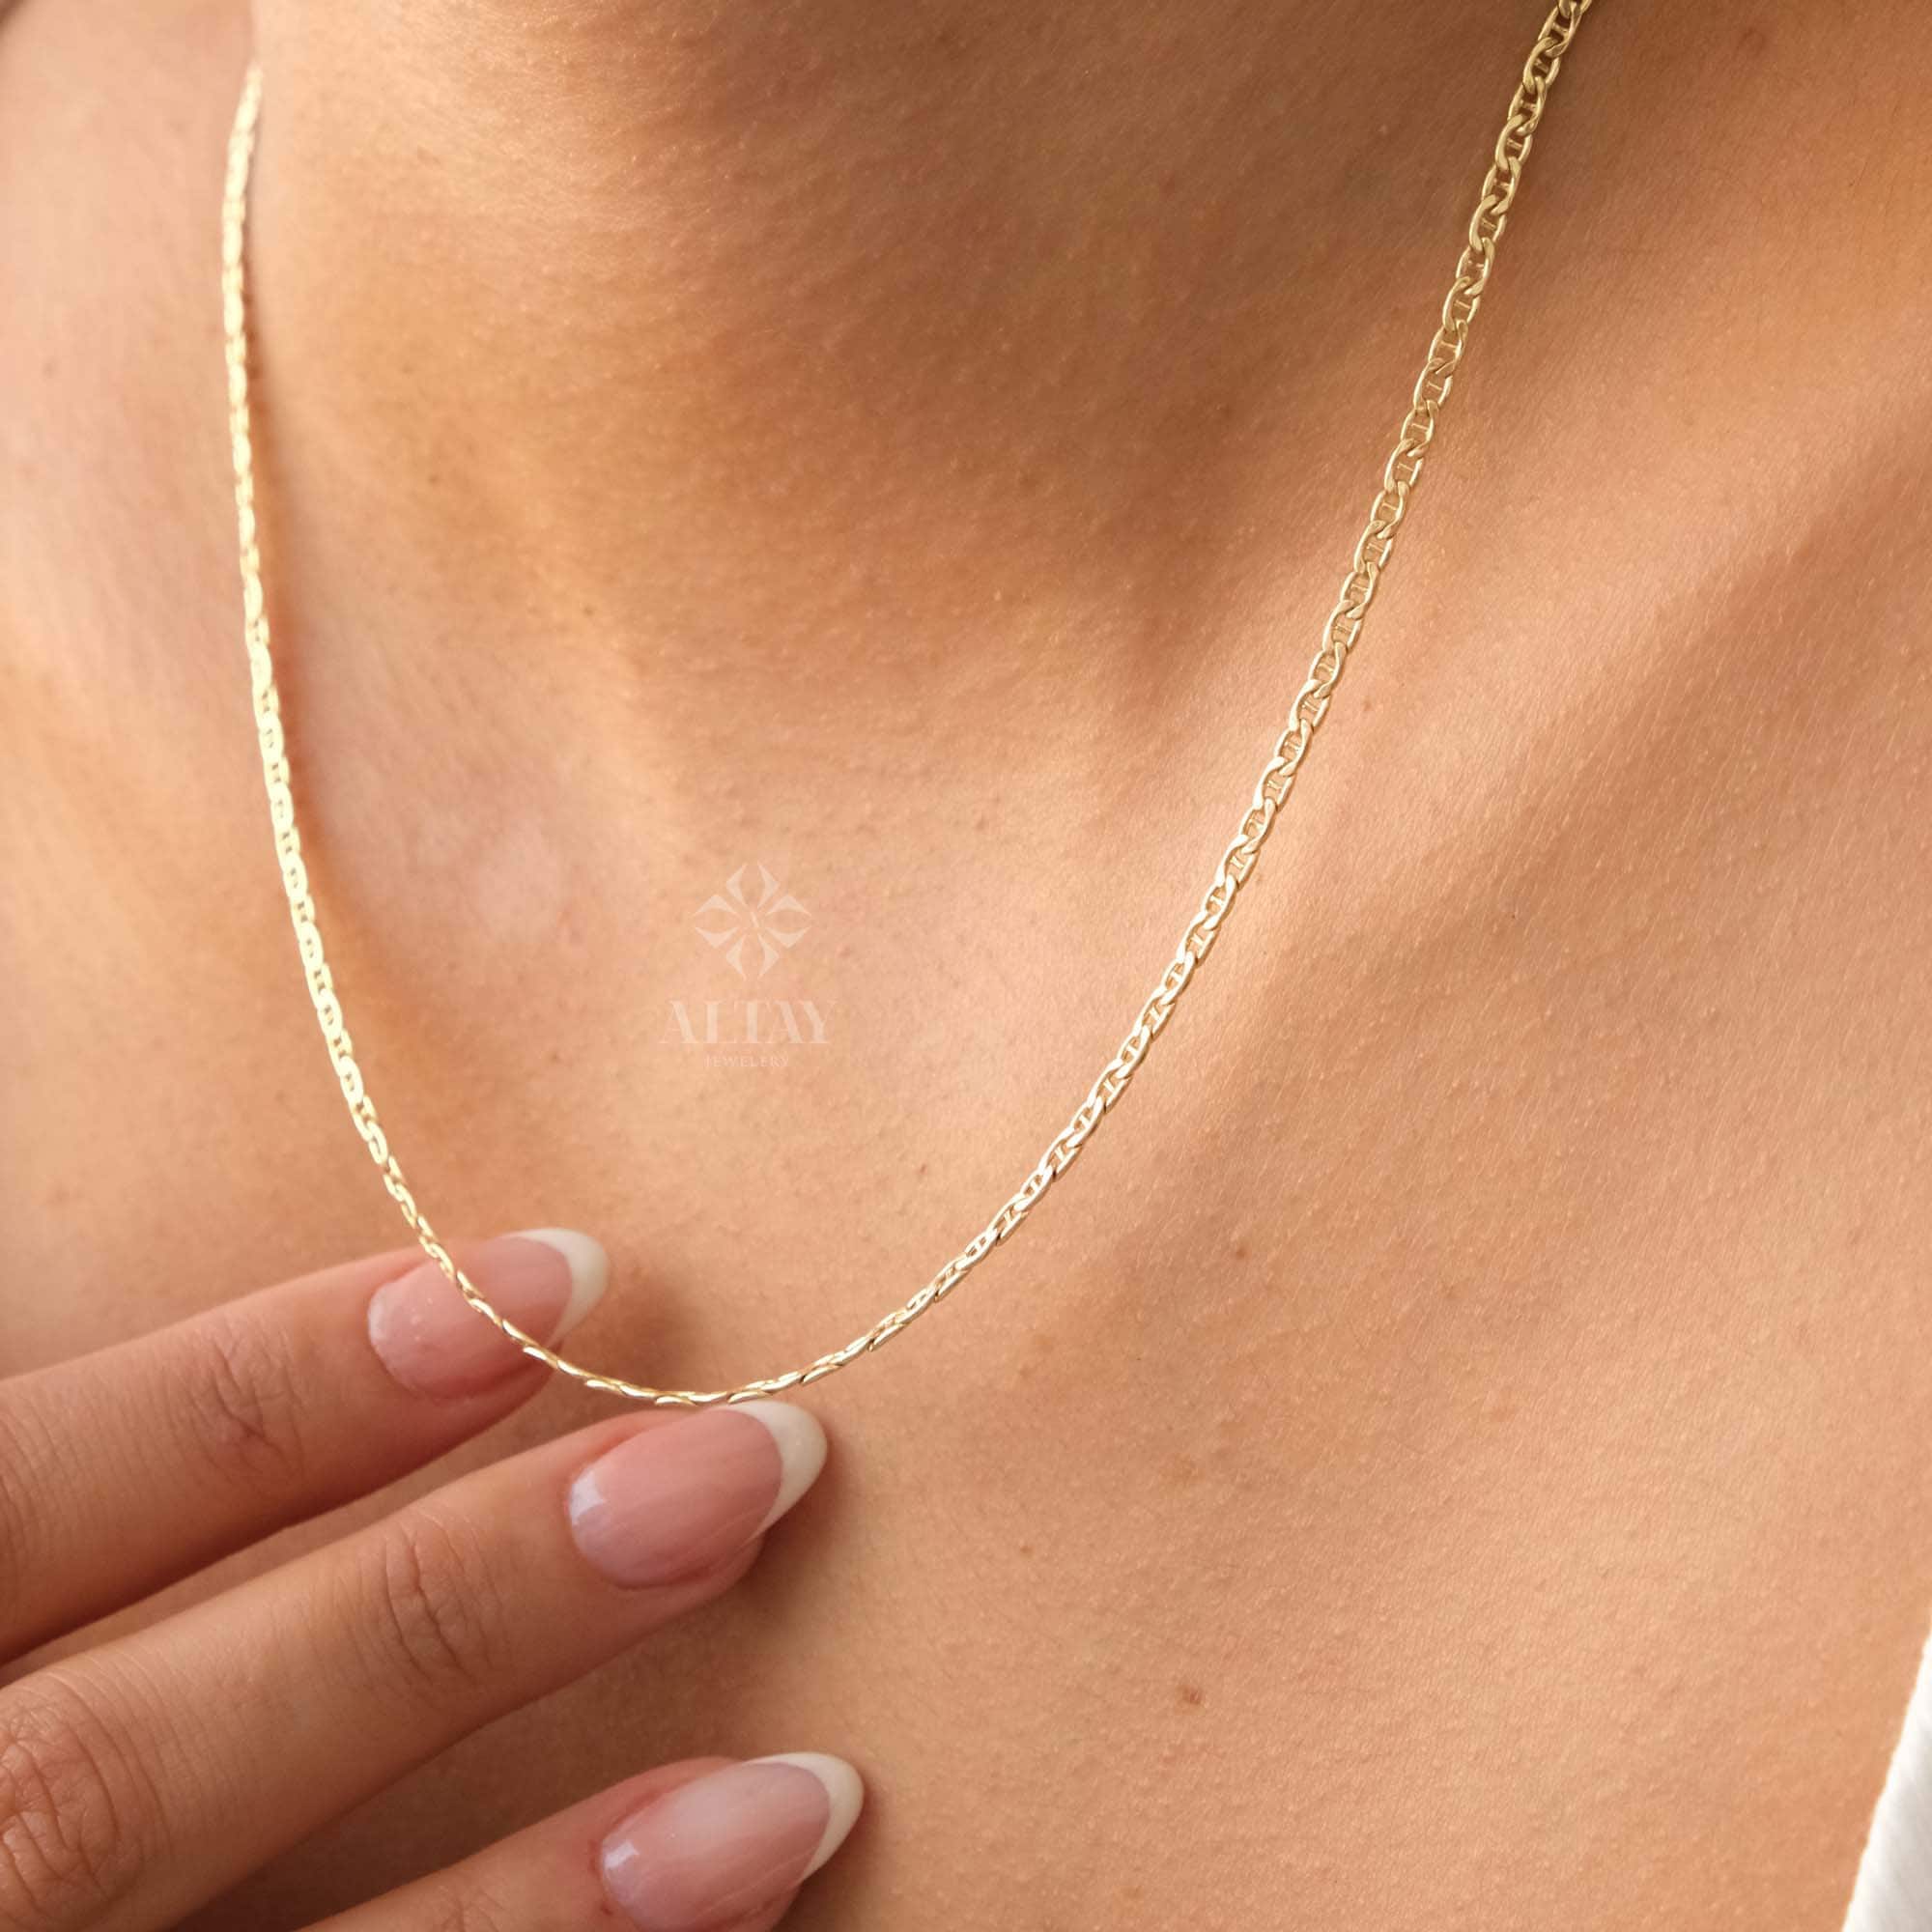 14K Gold Mariner Chain Necklace, 2mm Mariner Link Chain Necklace, Anchor Link Necklace, Flat Mariner Necklace, Minimalist Layering Necklace